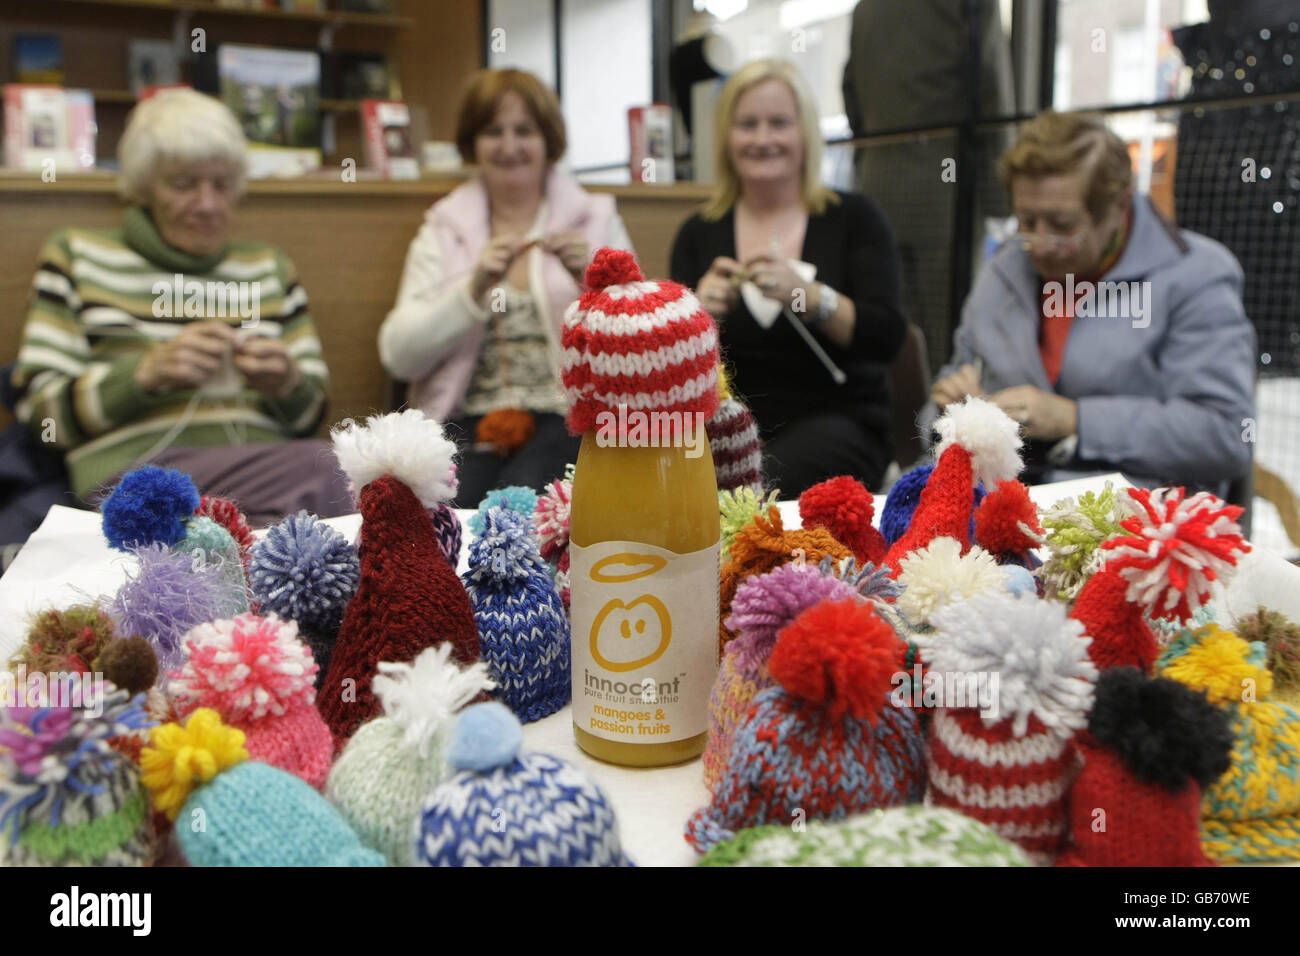 Customers take part in a 'Knit in' at Age Actions shop in Dublin where they are trying to raise euro 20,000 by knitting little wooly hats for Innocent smoothy Bottles. Stock Photo